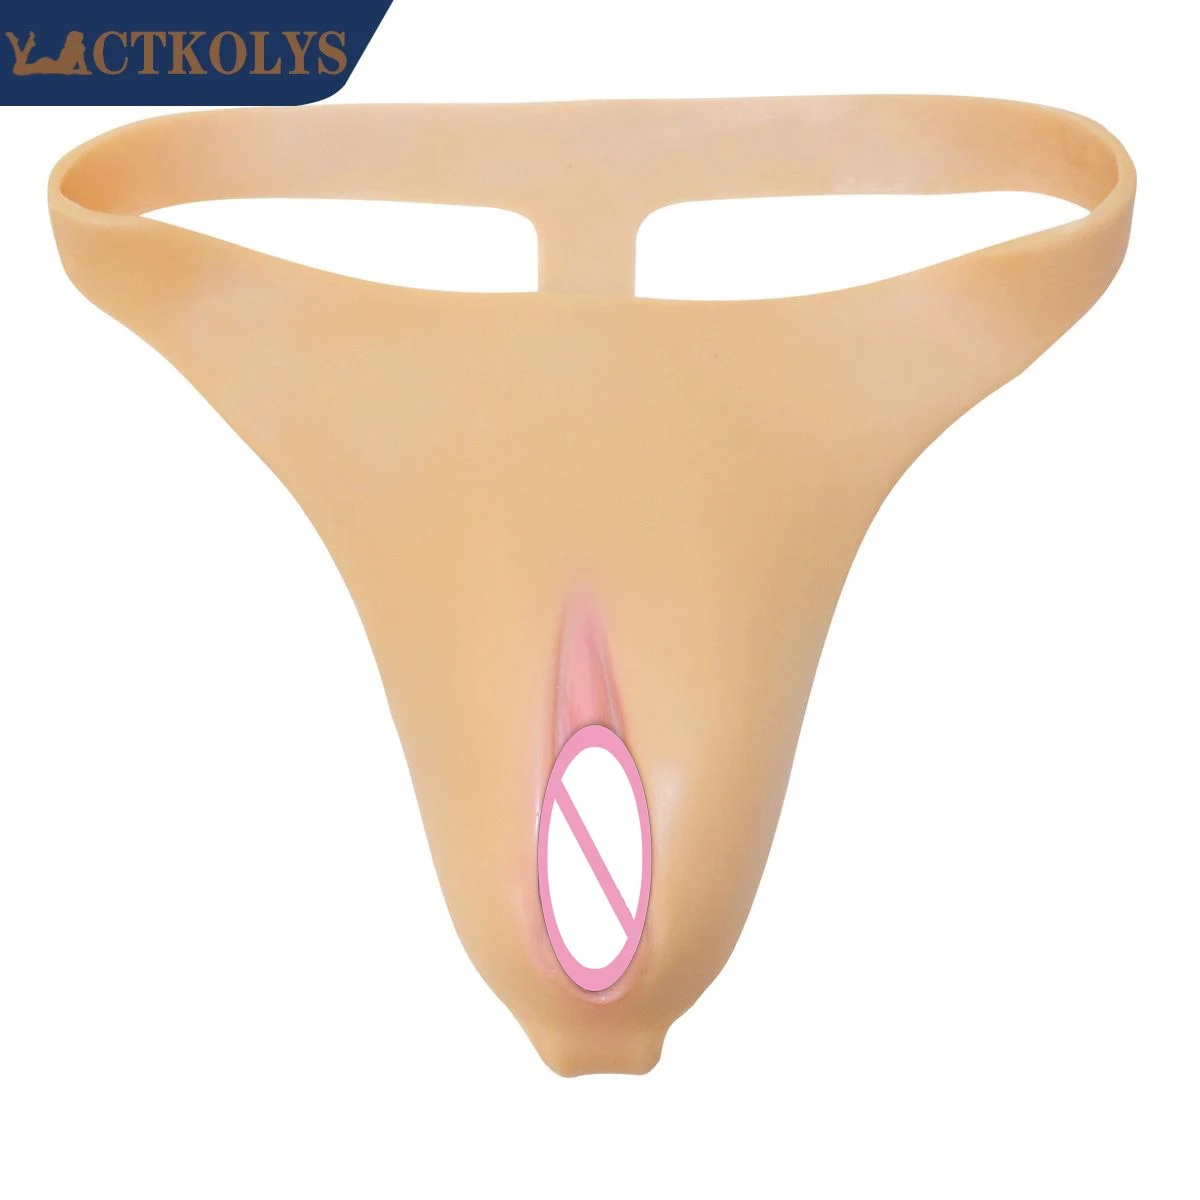 Abalone Vulva Transgender Fake Vagina Realistic Pussy Underwear Men Silicone Panties for Cosplay Drag Queen Shemale Crossdress